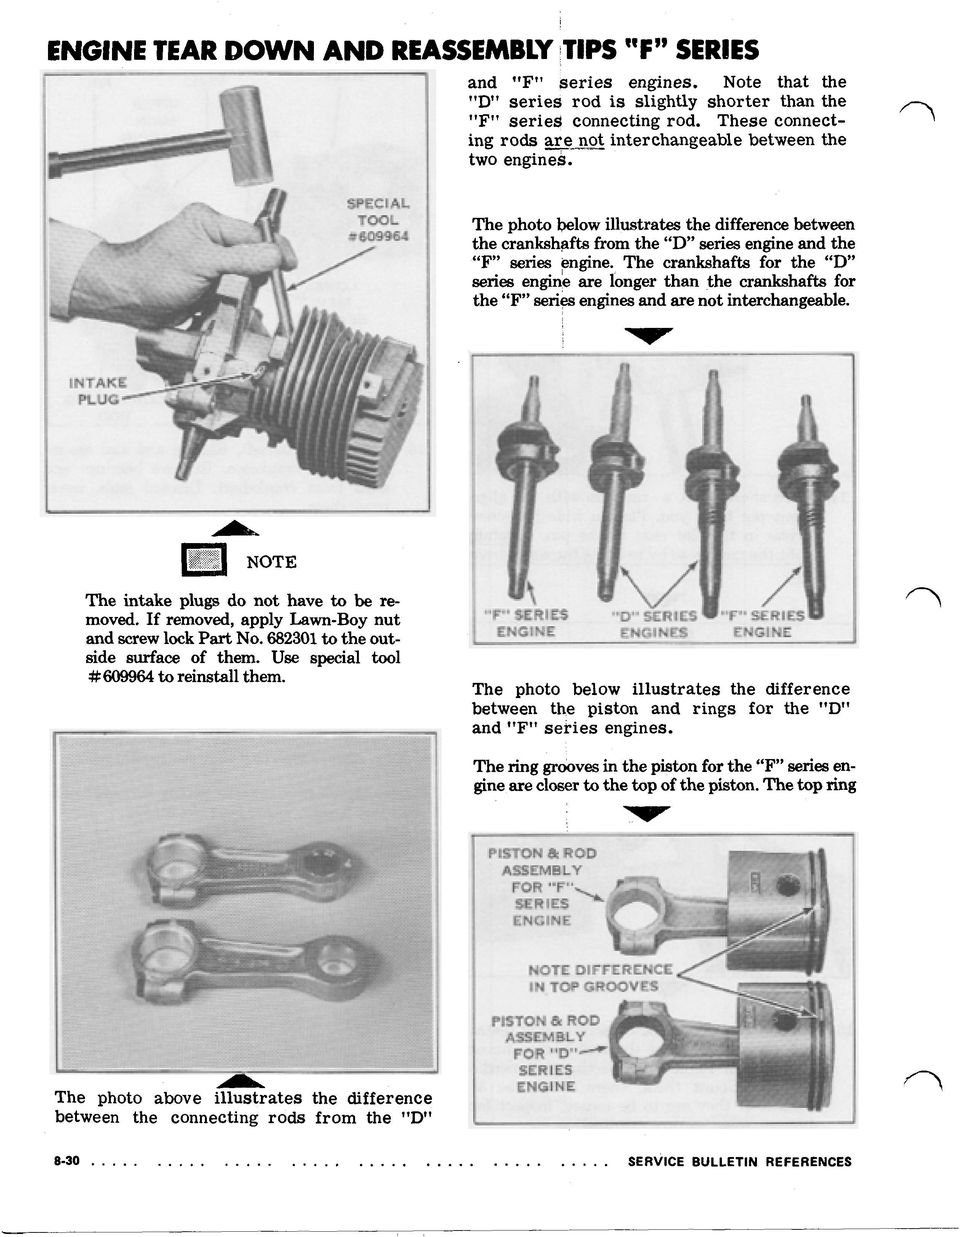 The crankshafts for the "D' series engine are longer than the crankshafts for the "F" series engines and are not interchangeable. The intake plugs do not have to be removed.